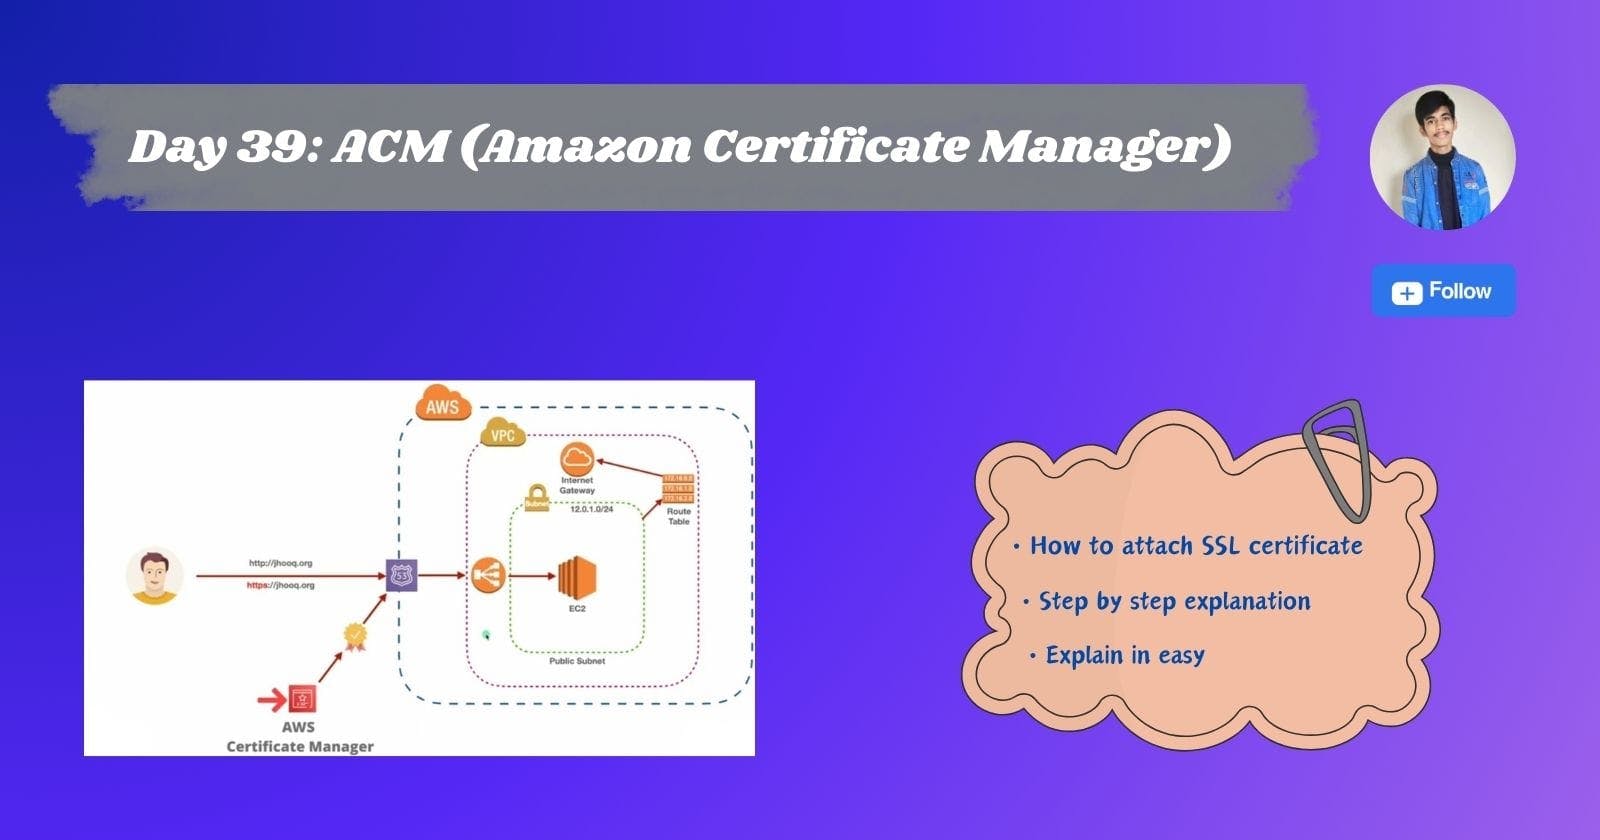 Day 39: What is ACM (Amazon Certificate Manager)